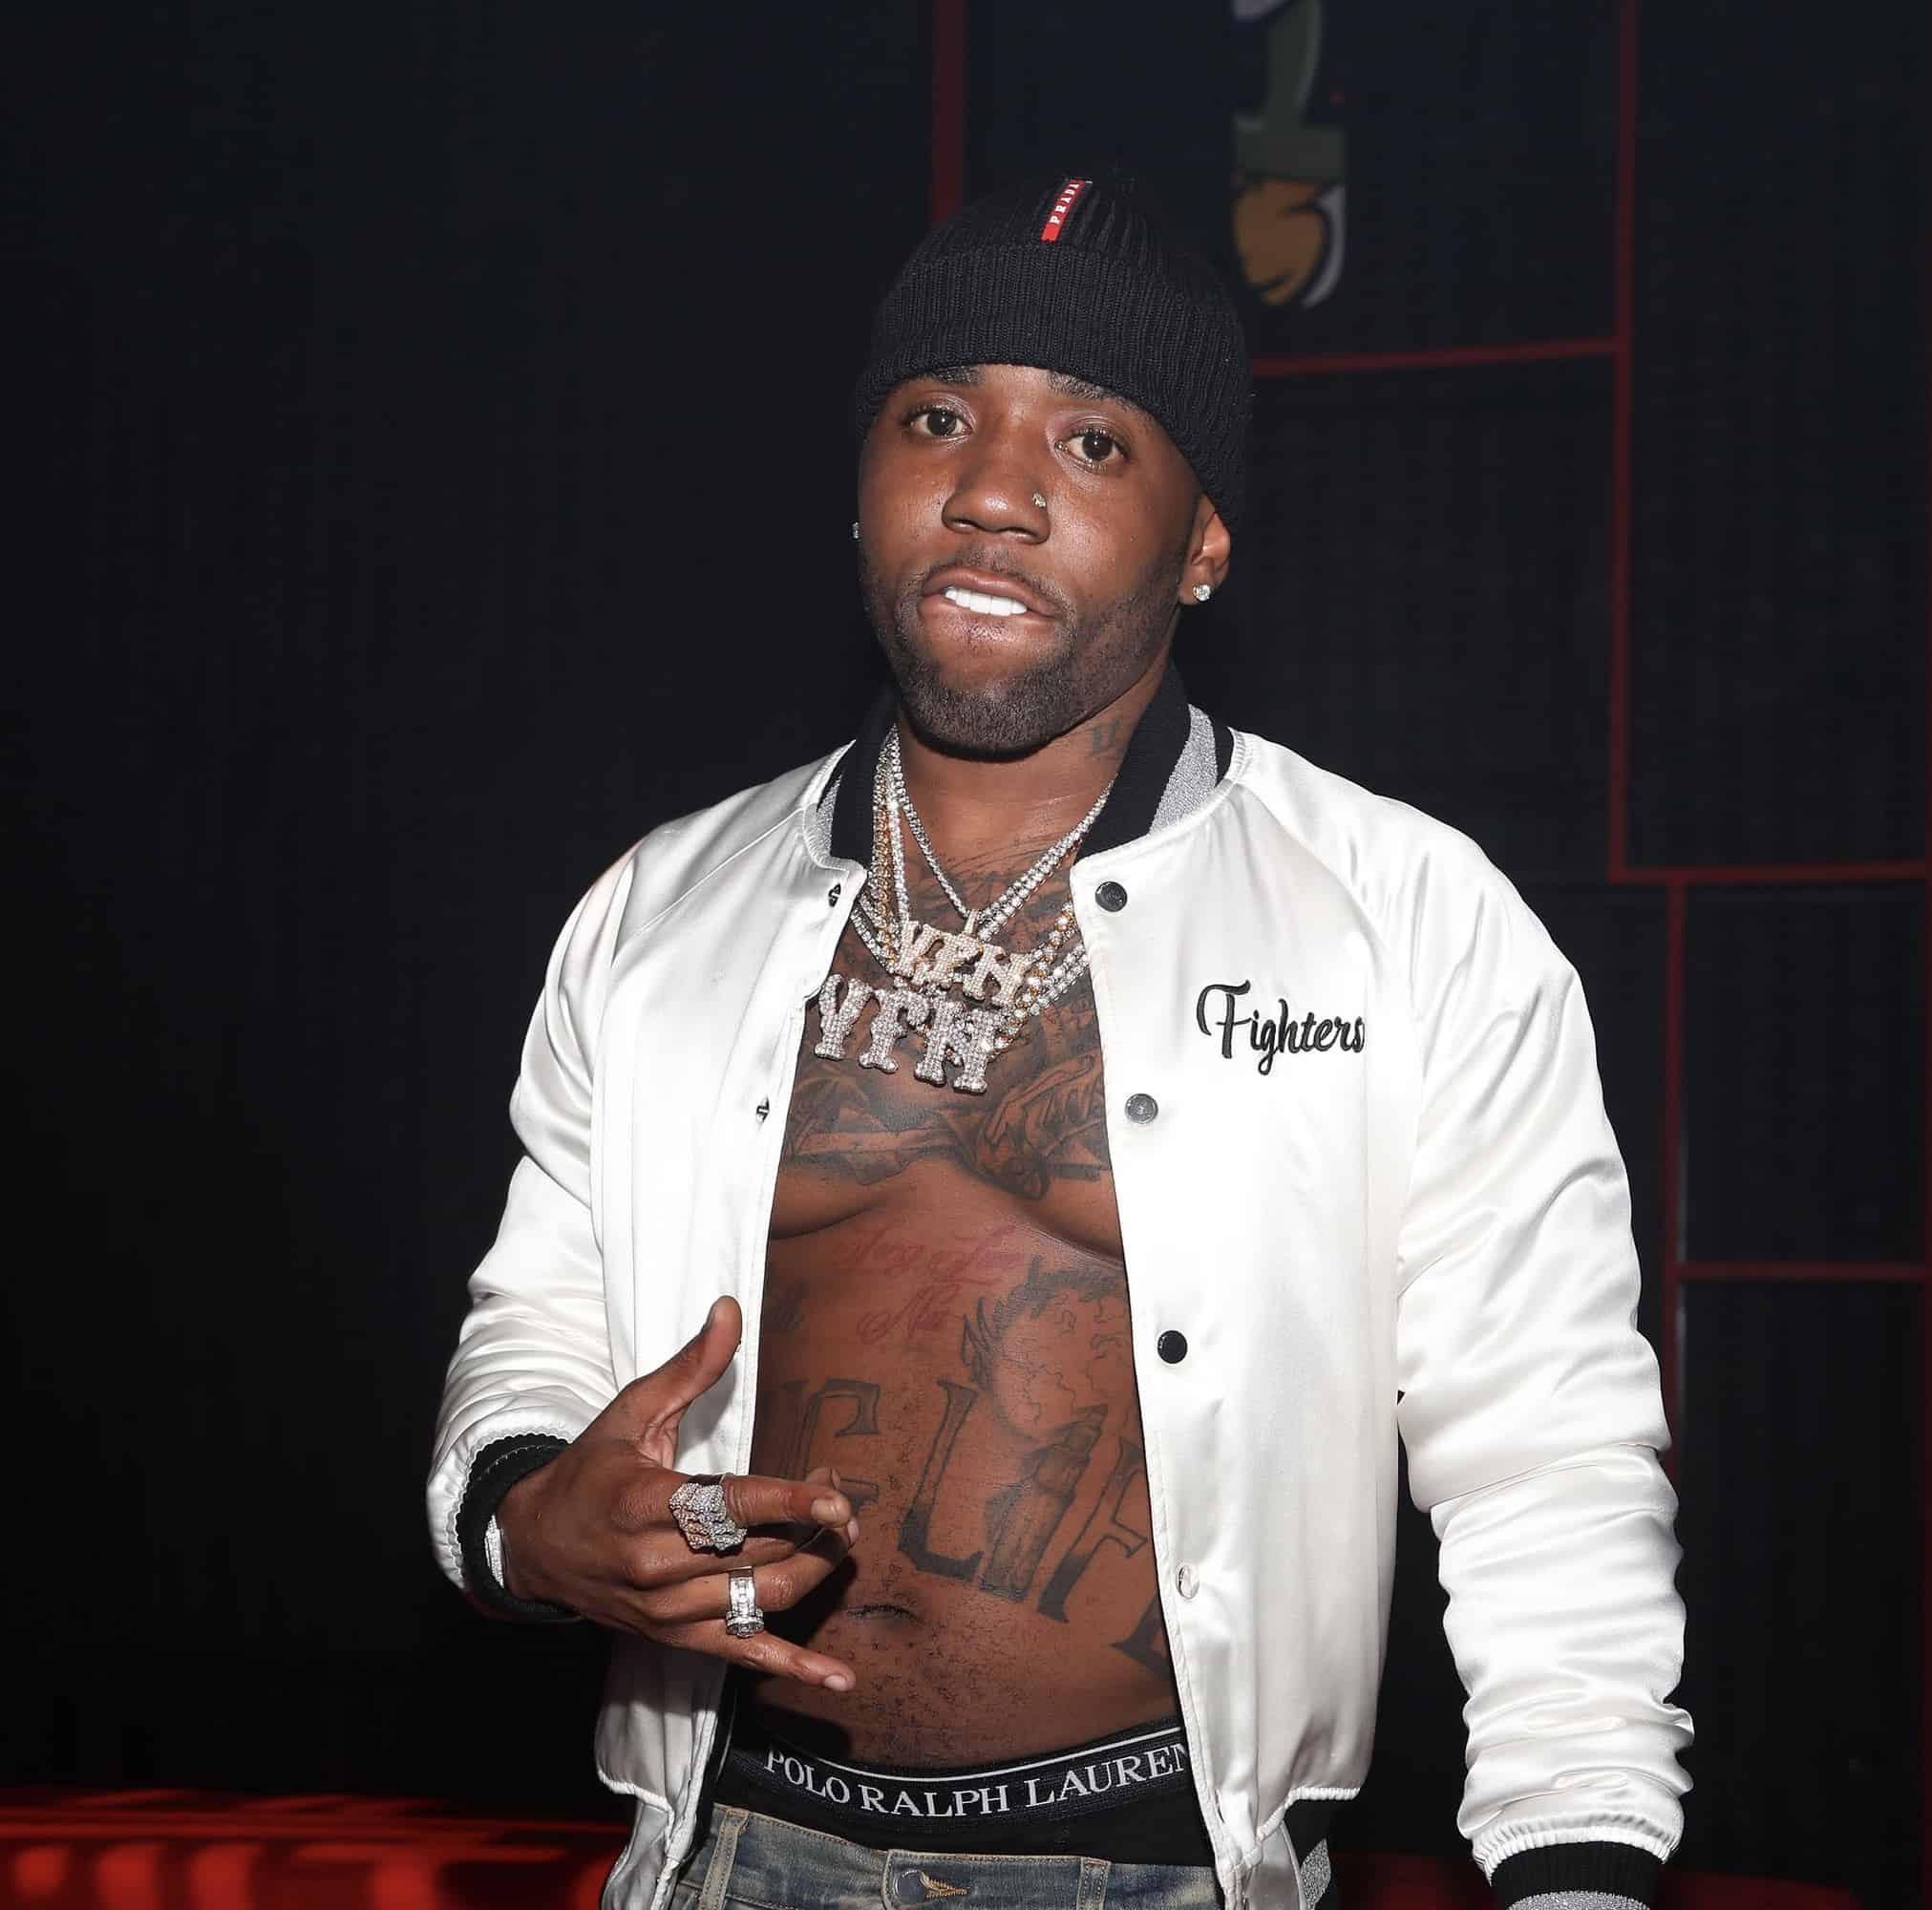 Reginae Carter's BF, YFN Lucci Surrendered To Authorities - He's Involved In A Racketeering Case